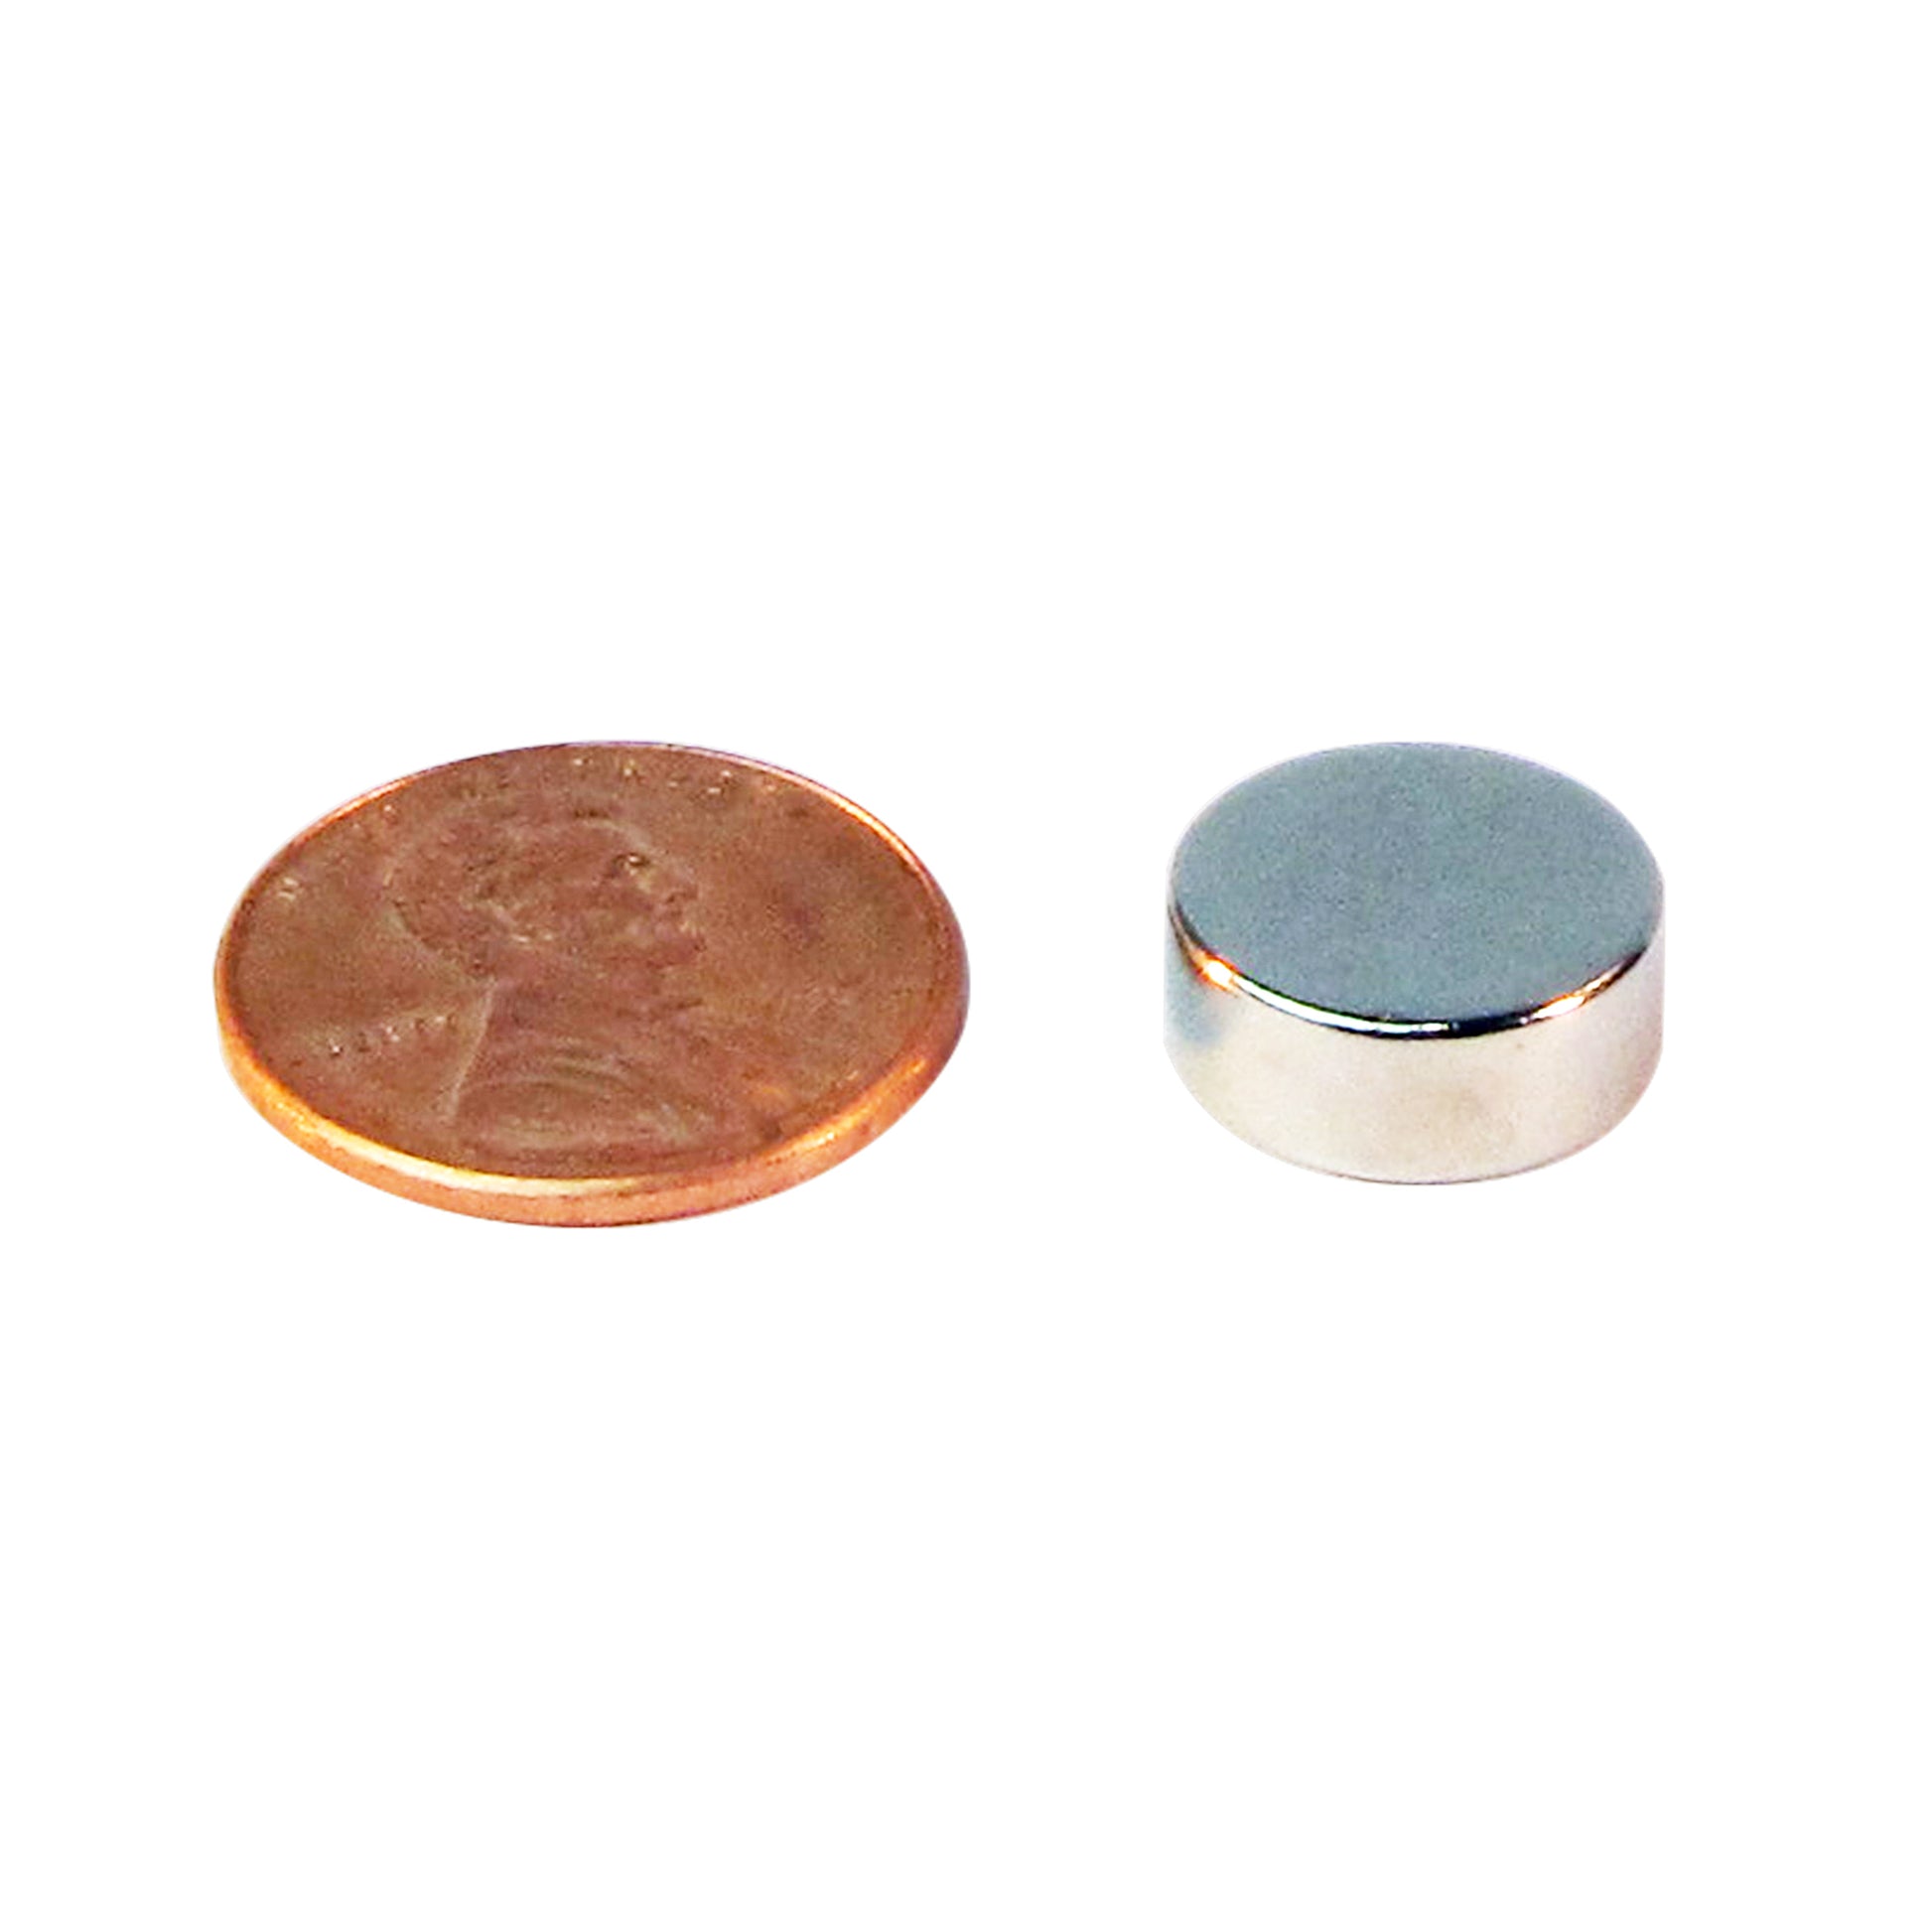 Load image into Gallery viewer, ND45-5020N Neodymium Disc Magnet - Compared to Penny for Size Reference